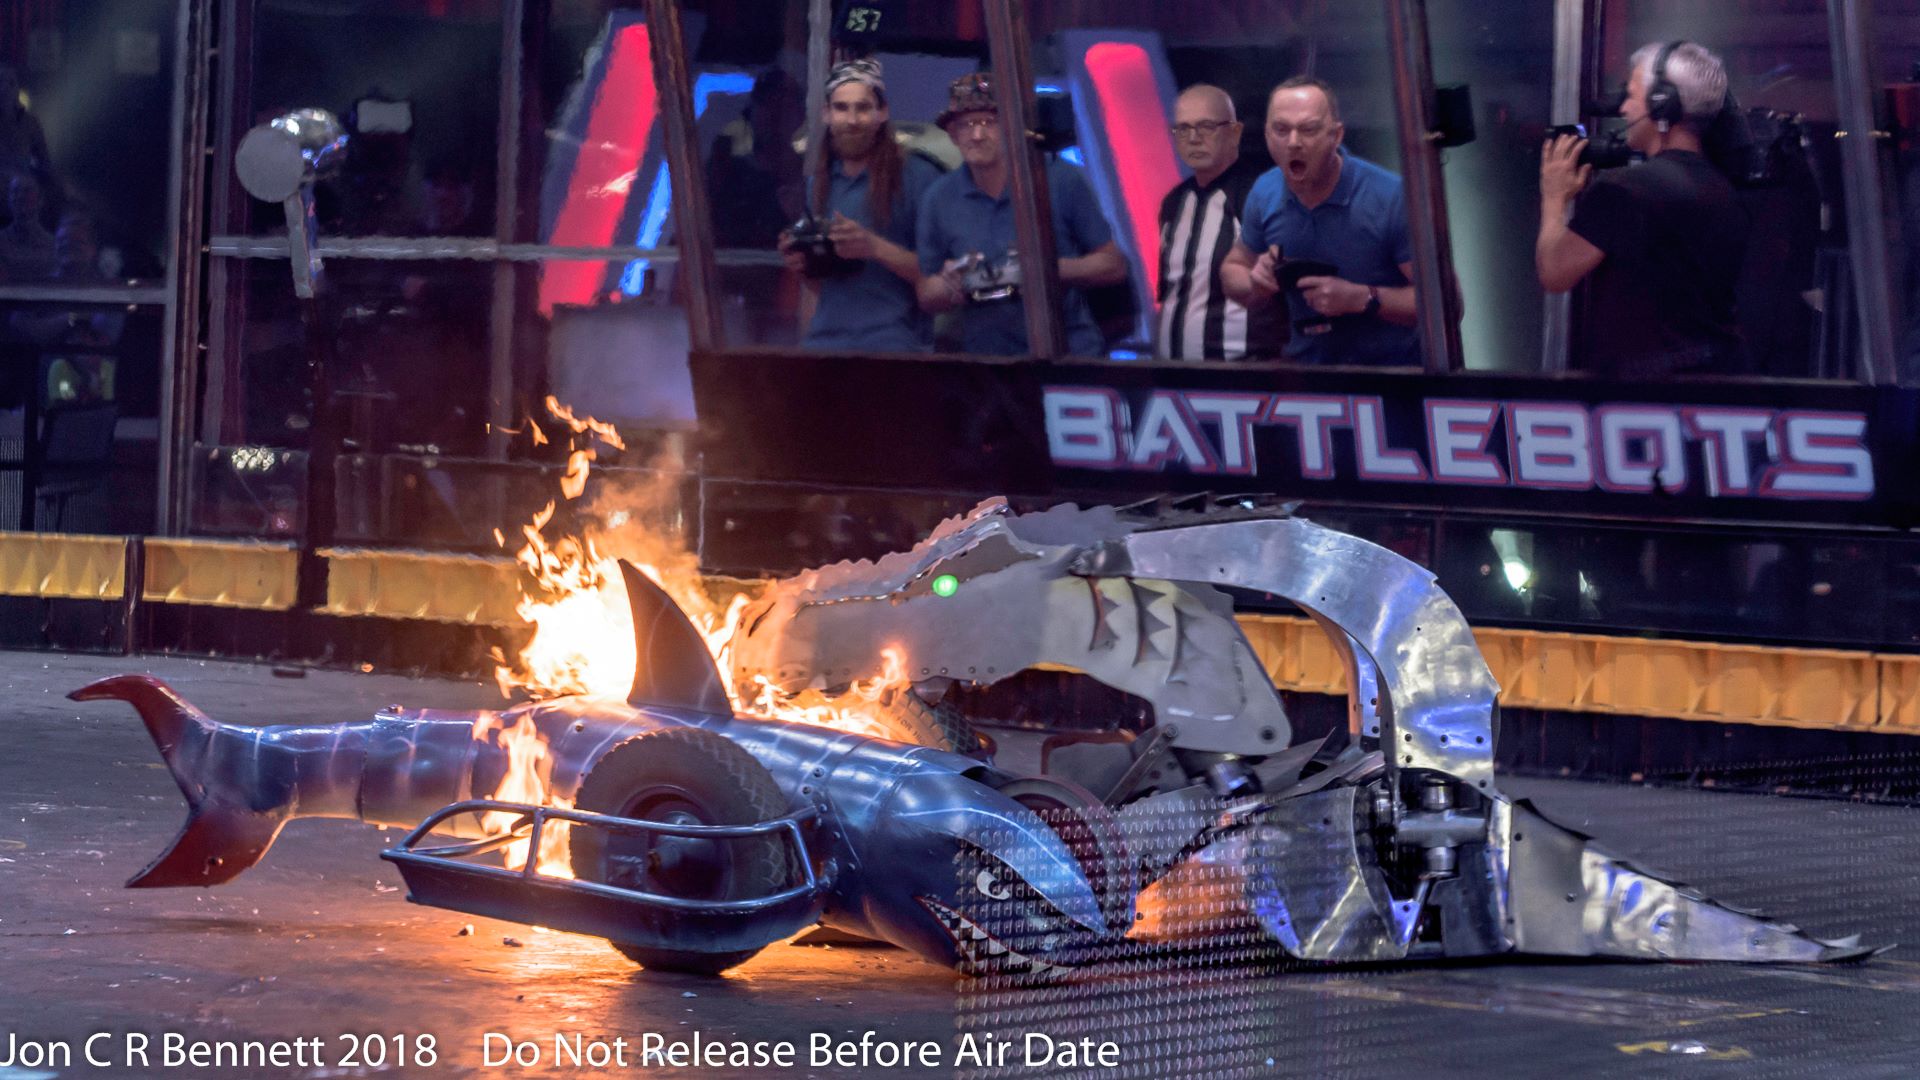 Battlebot arena featuring Sharkoprion battling another robot with flames shooting out of it's mouth and engineers in the background using remote controls